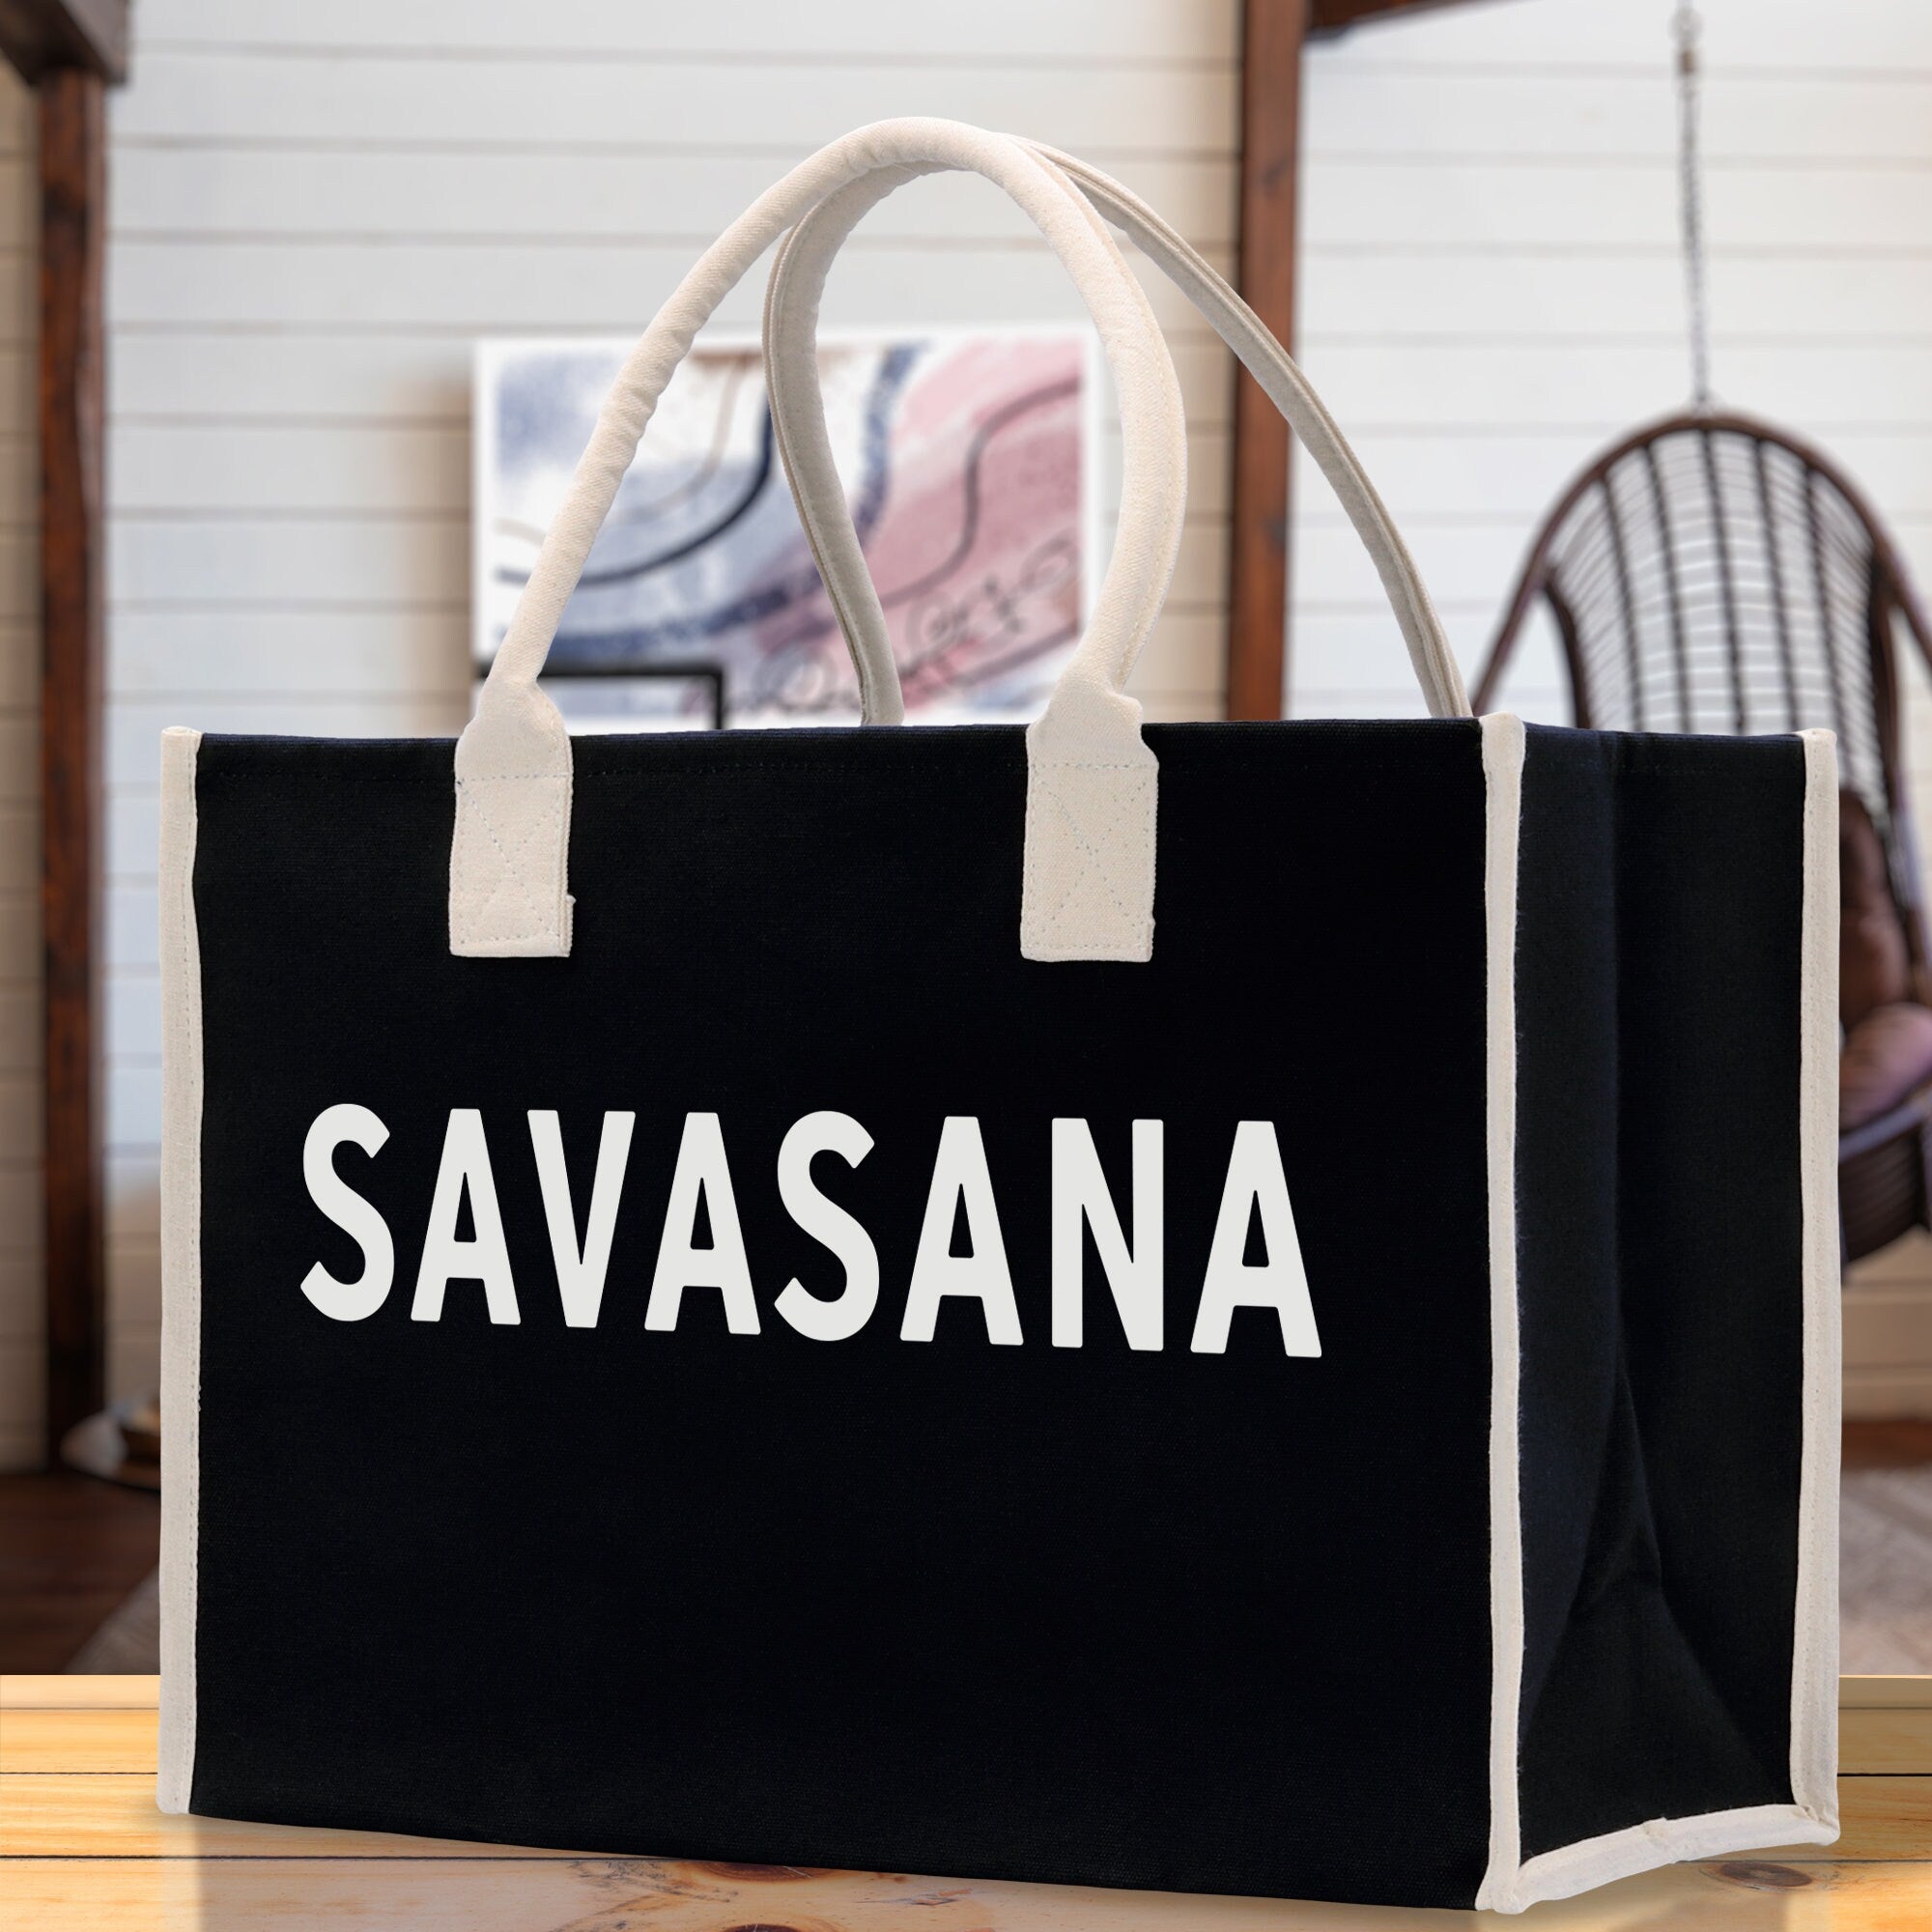 Savasana Cotton Canvas Chic Beach Tote Bag Multipurpose Tote Weekender Tote Gift for Her Outdoor Tote Vacation Tote Large Beach Bag